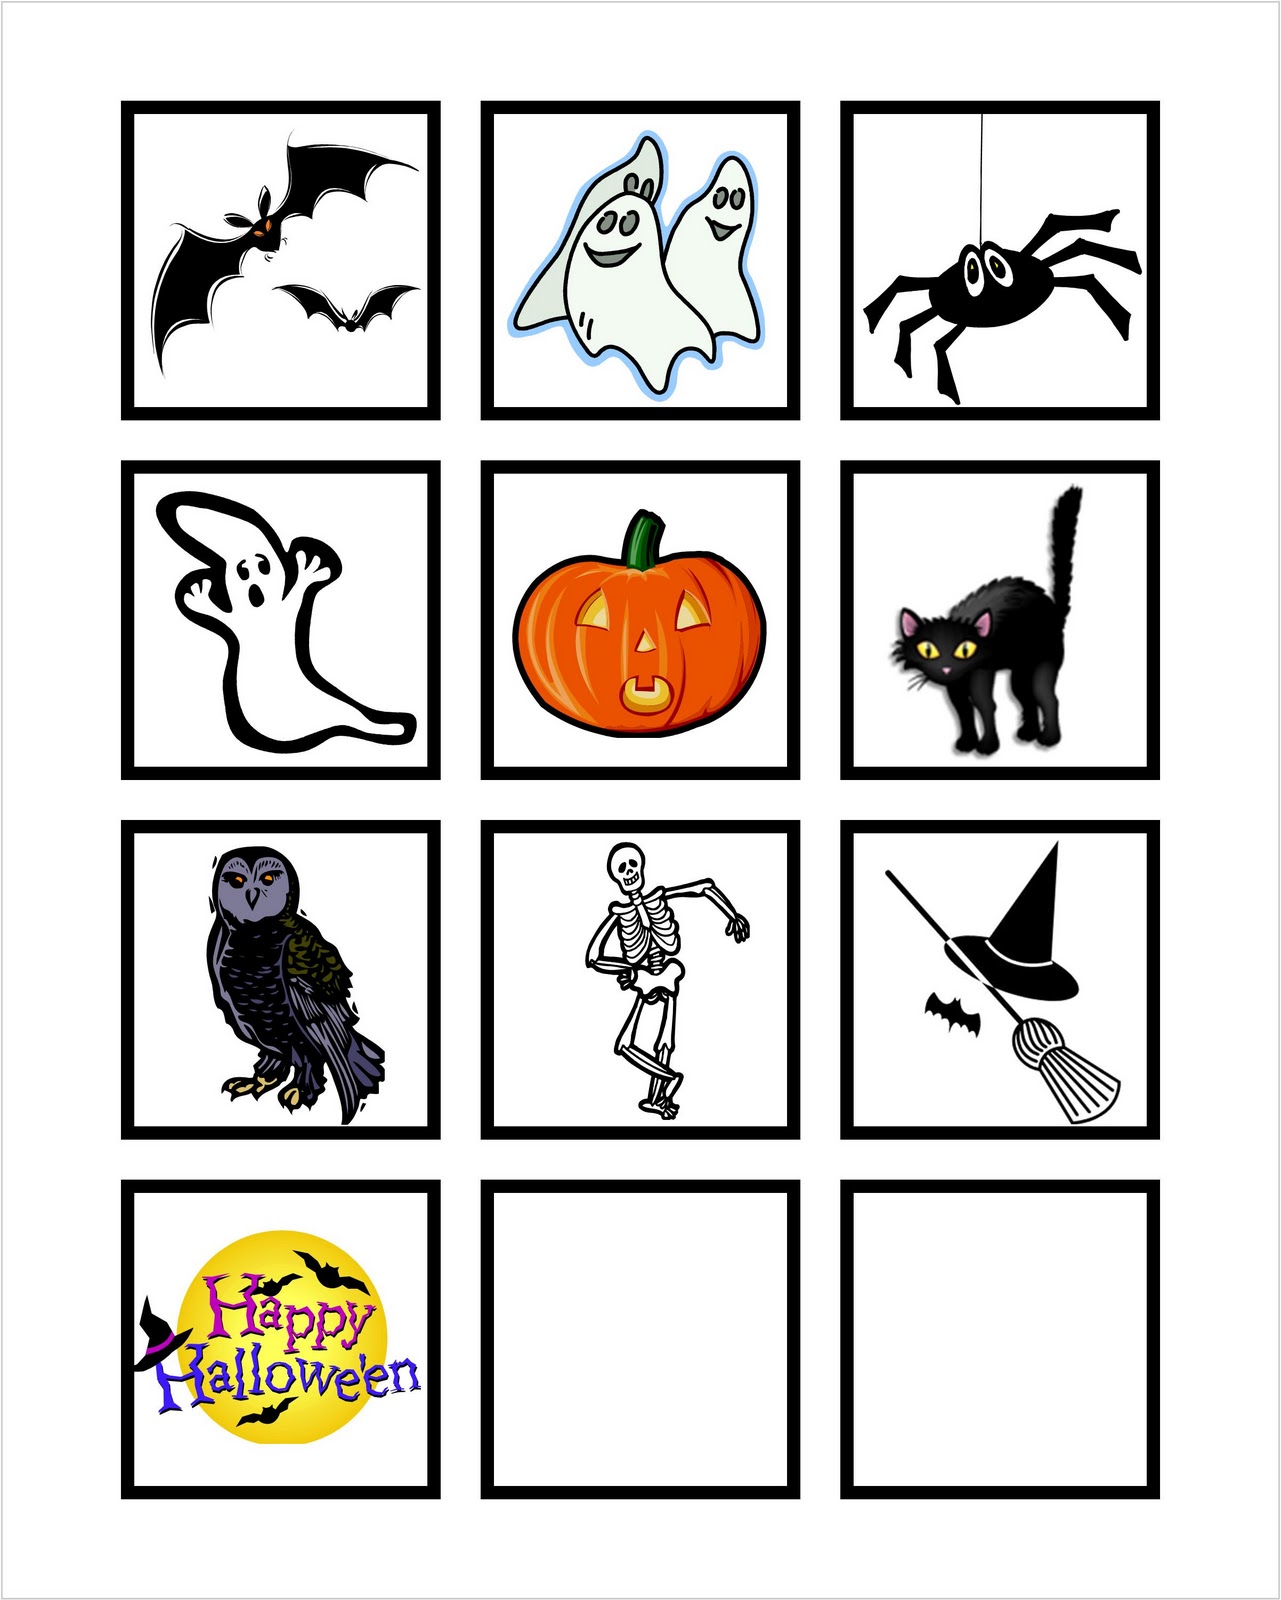 Today's Fabulous Finds: Printable Halloween Countdown {Wood Block Version}